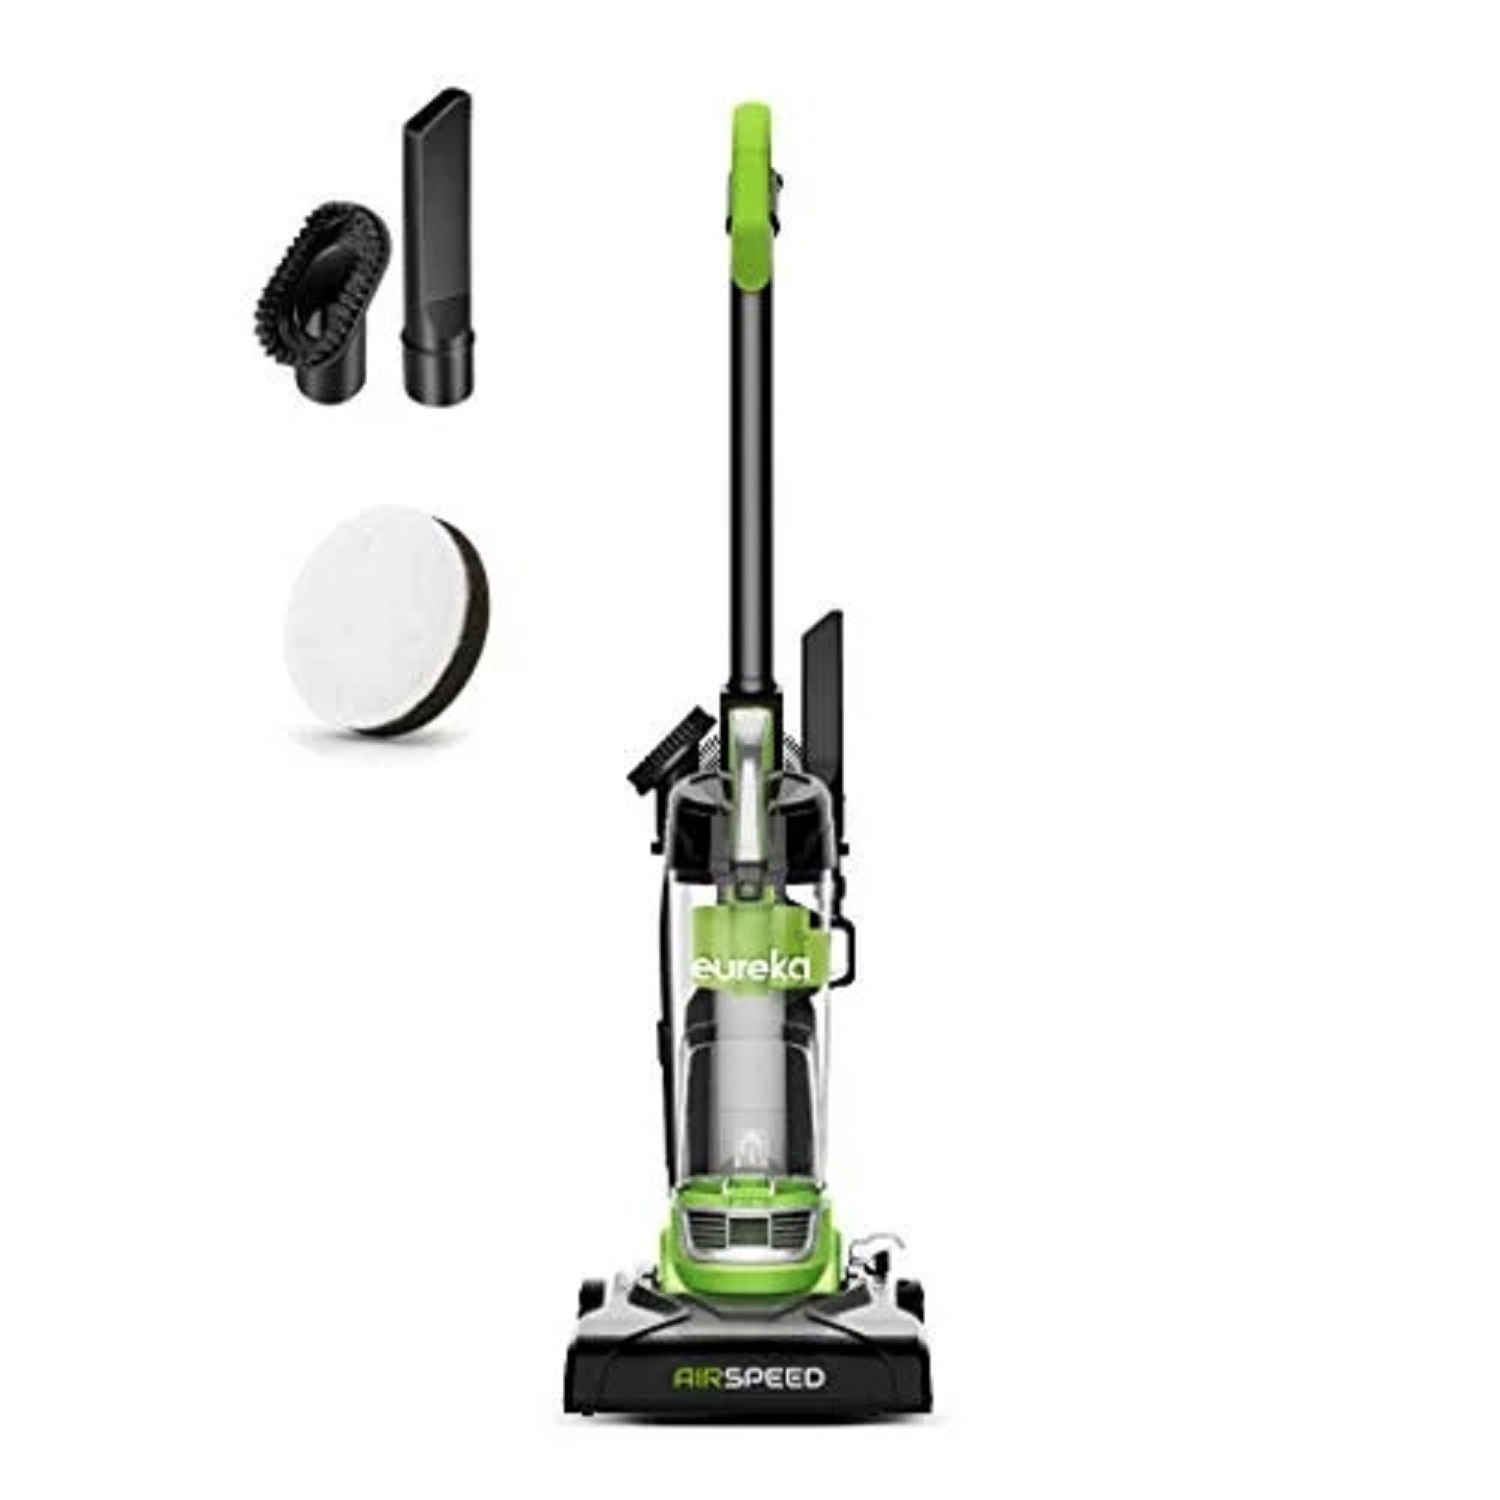 Eureka Airspeed Ultra-Lightweight Compact Bagless Upright Vacuum Cleaner, - image 2 of 2